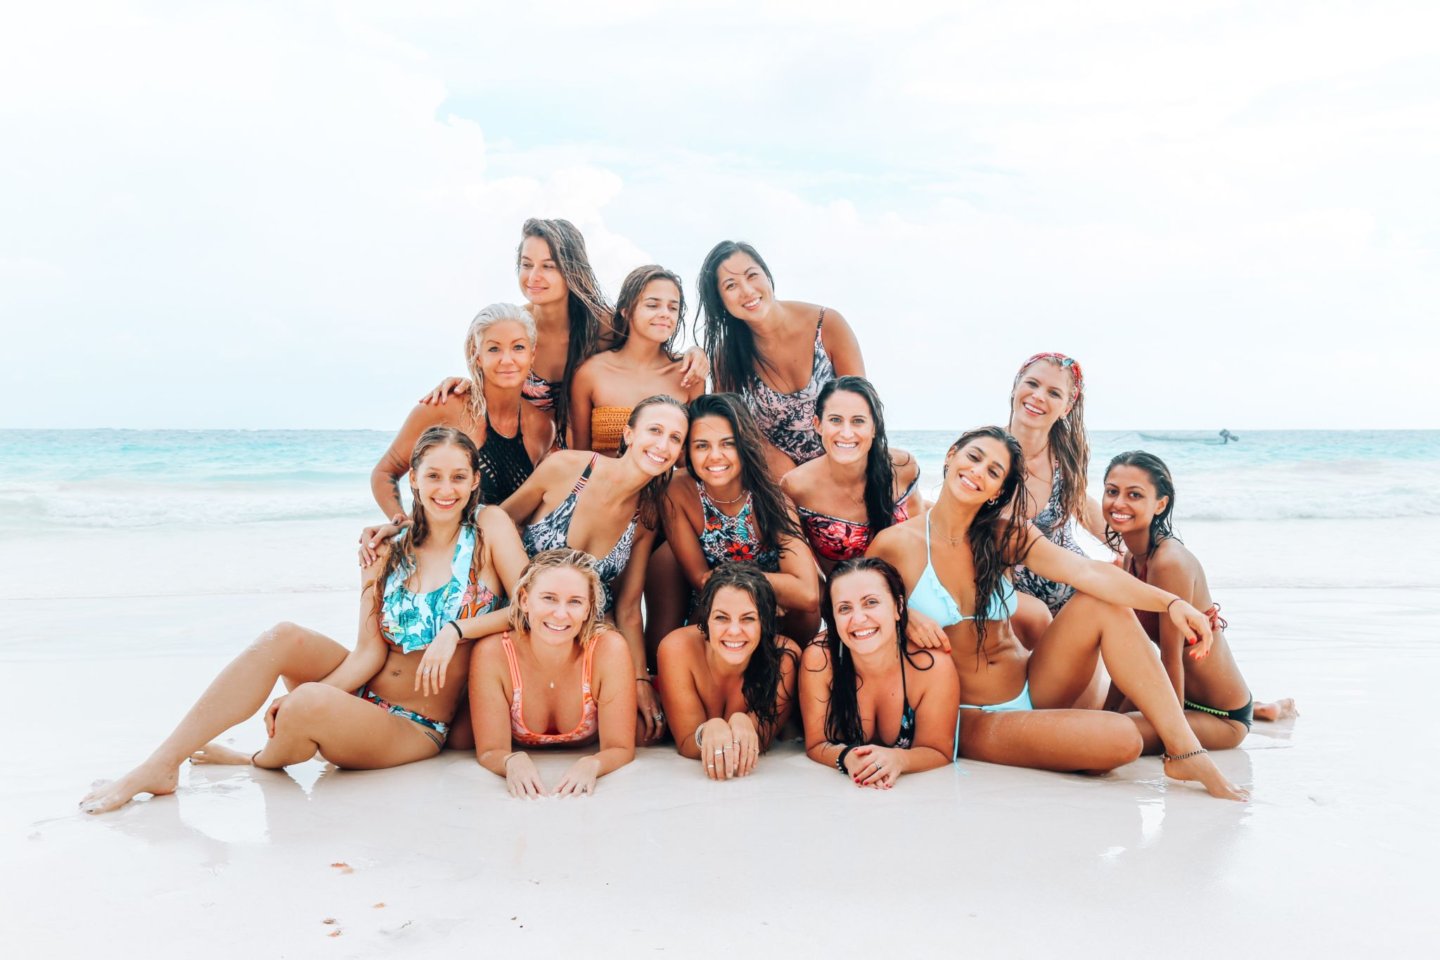 A group of women posing on a beach in Tulum, Mexico.